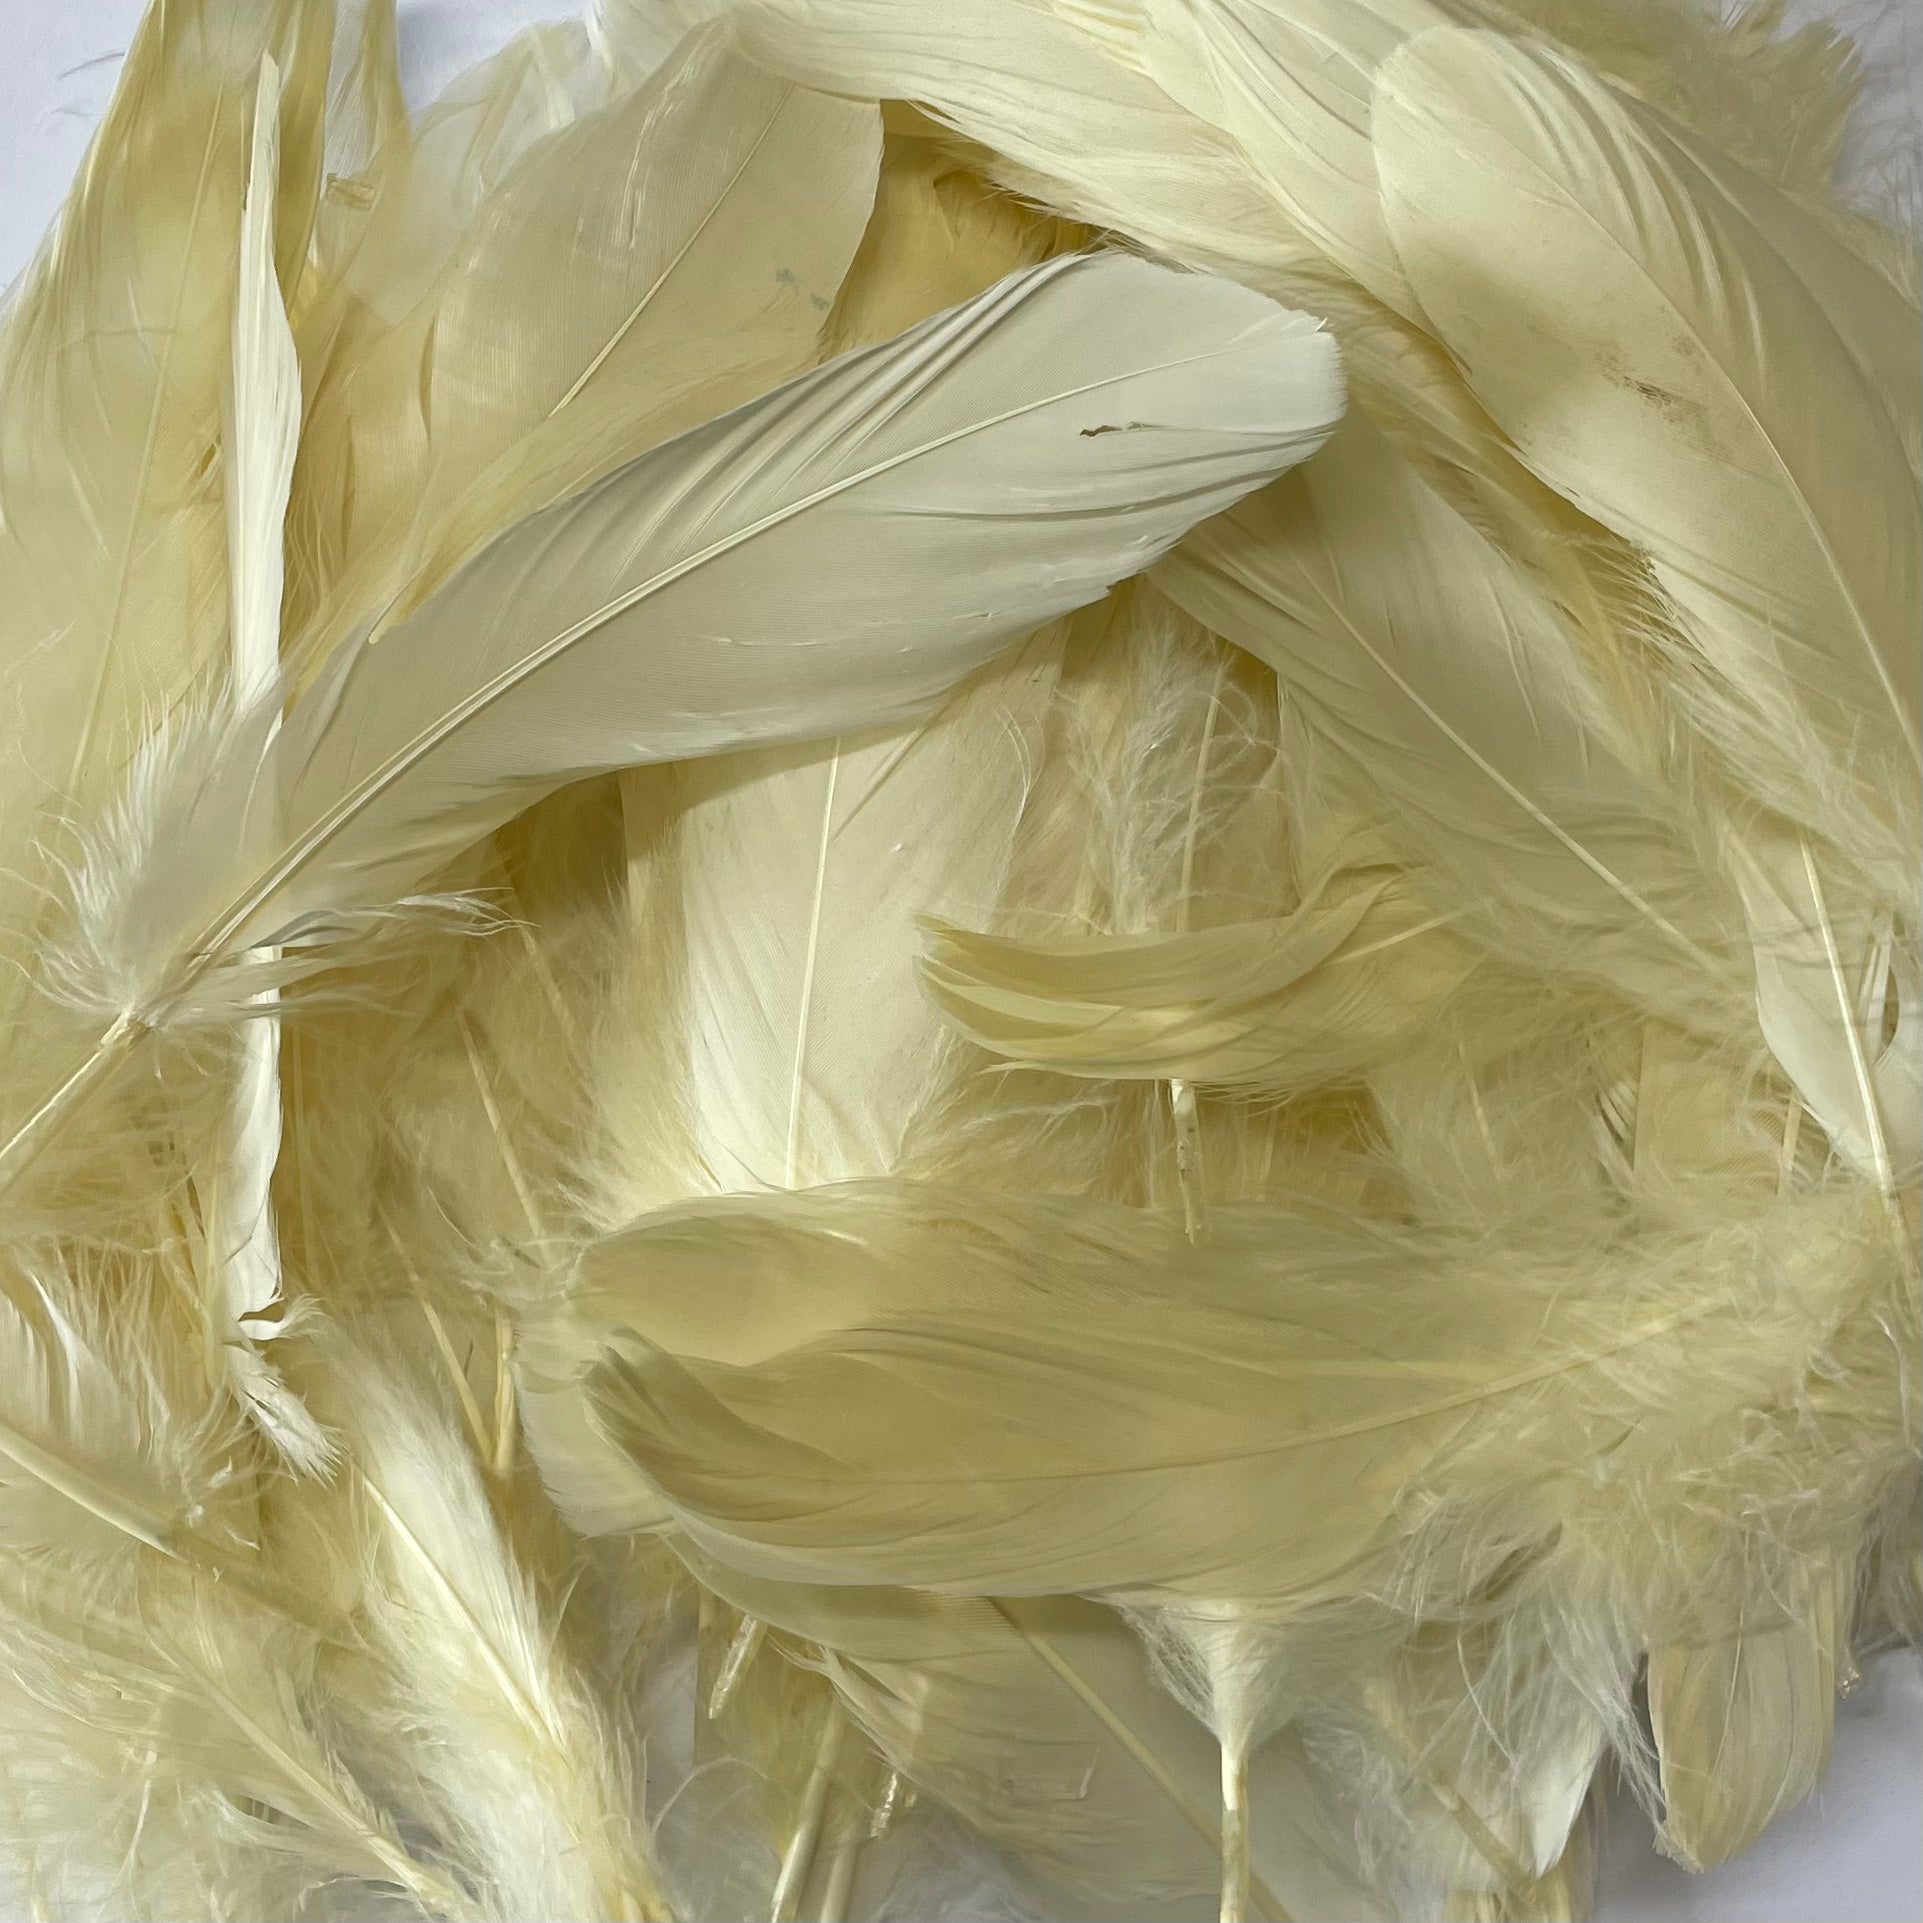 Goose Nagoire Feathers 10 grams - Cream ((SECONDS))